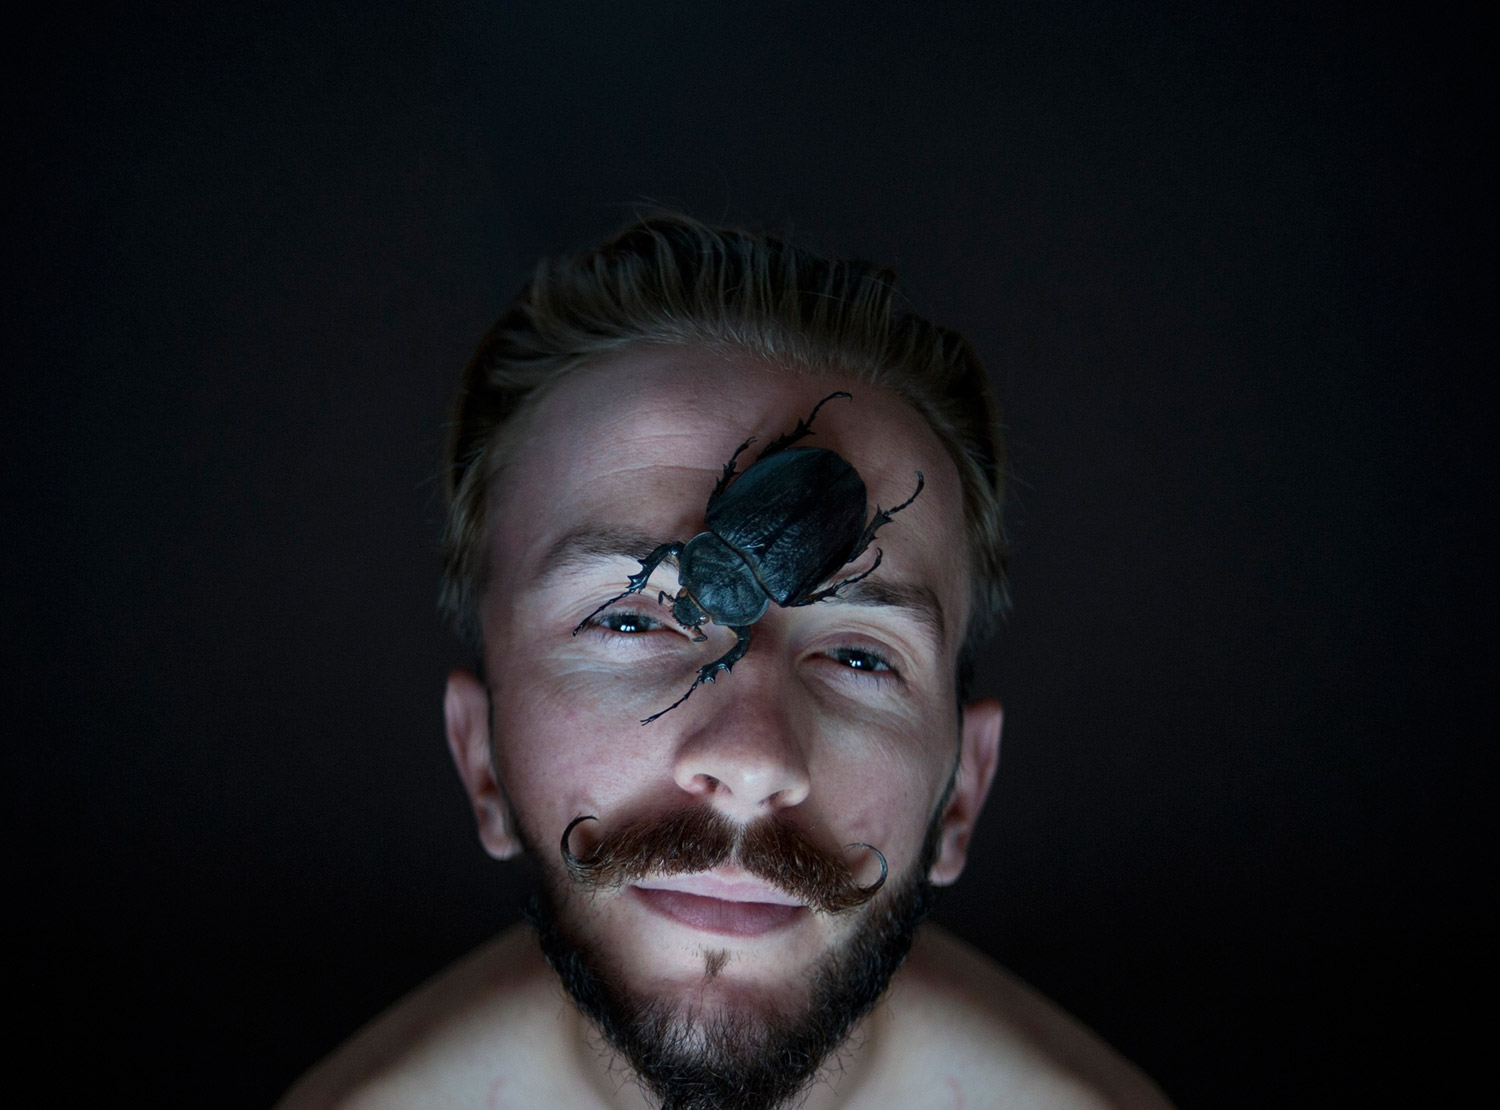 Ines Kozic, Insomnia - man with large beetle on forehead